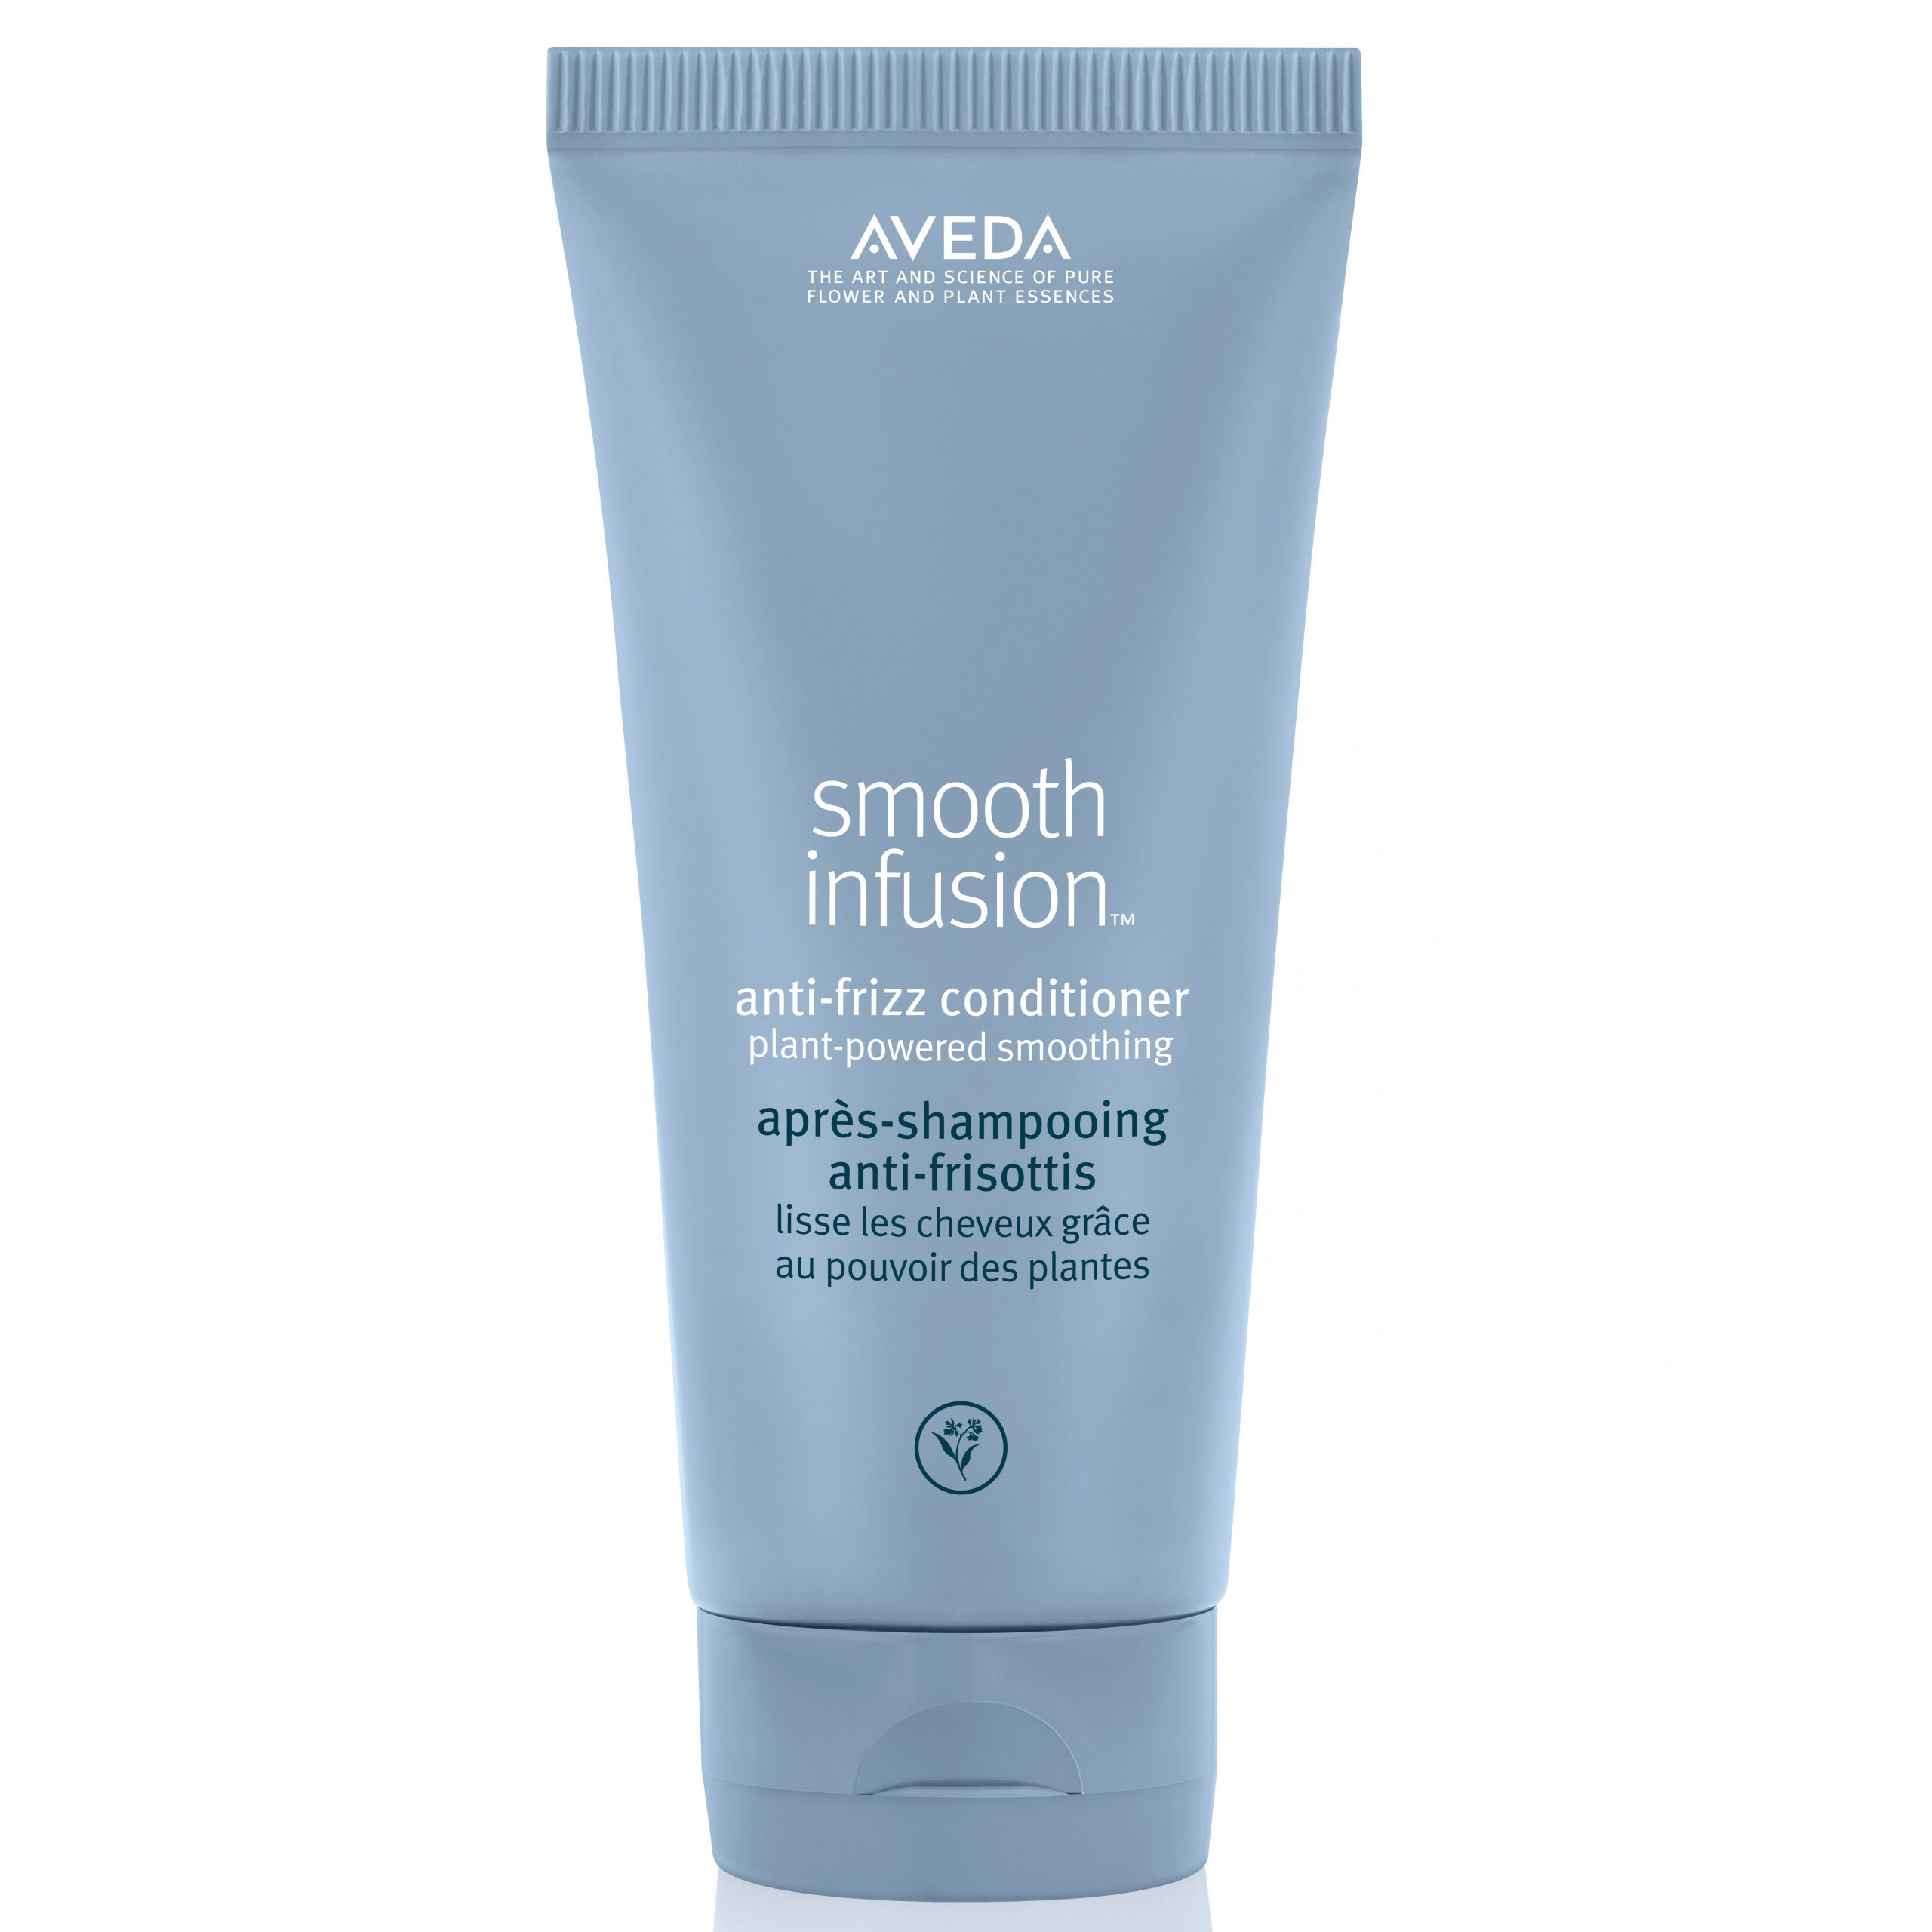 https://av-dashop.nl/wp-content/uploads/2022/07/Aveda-smooth-infusion-conditioner-scaled.jpg